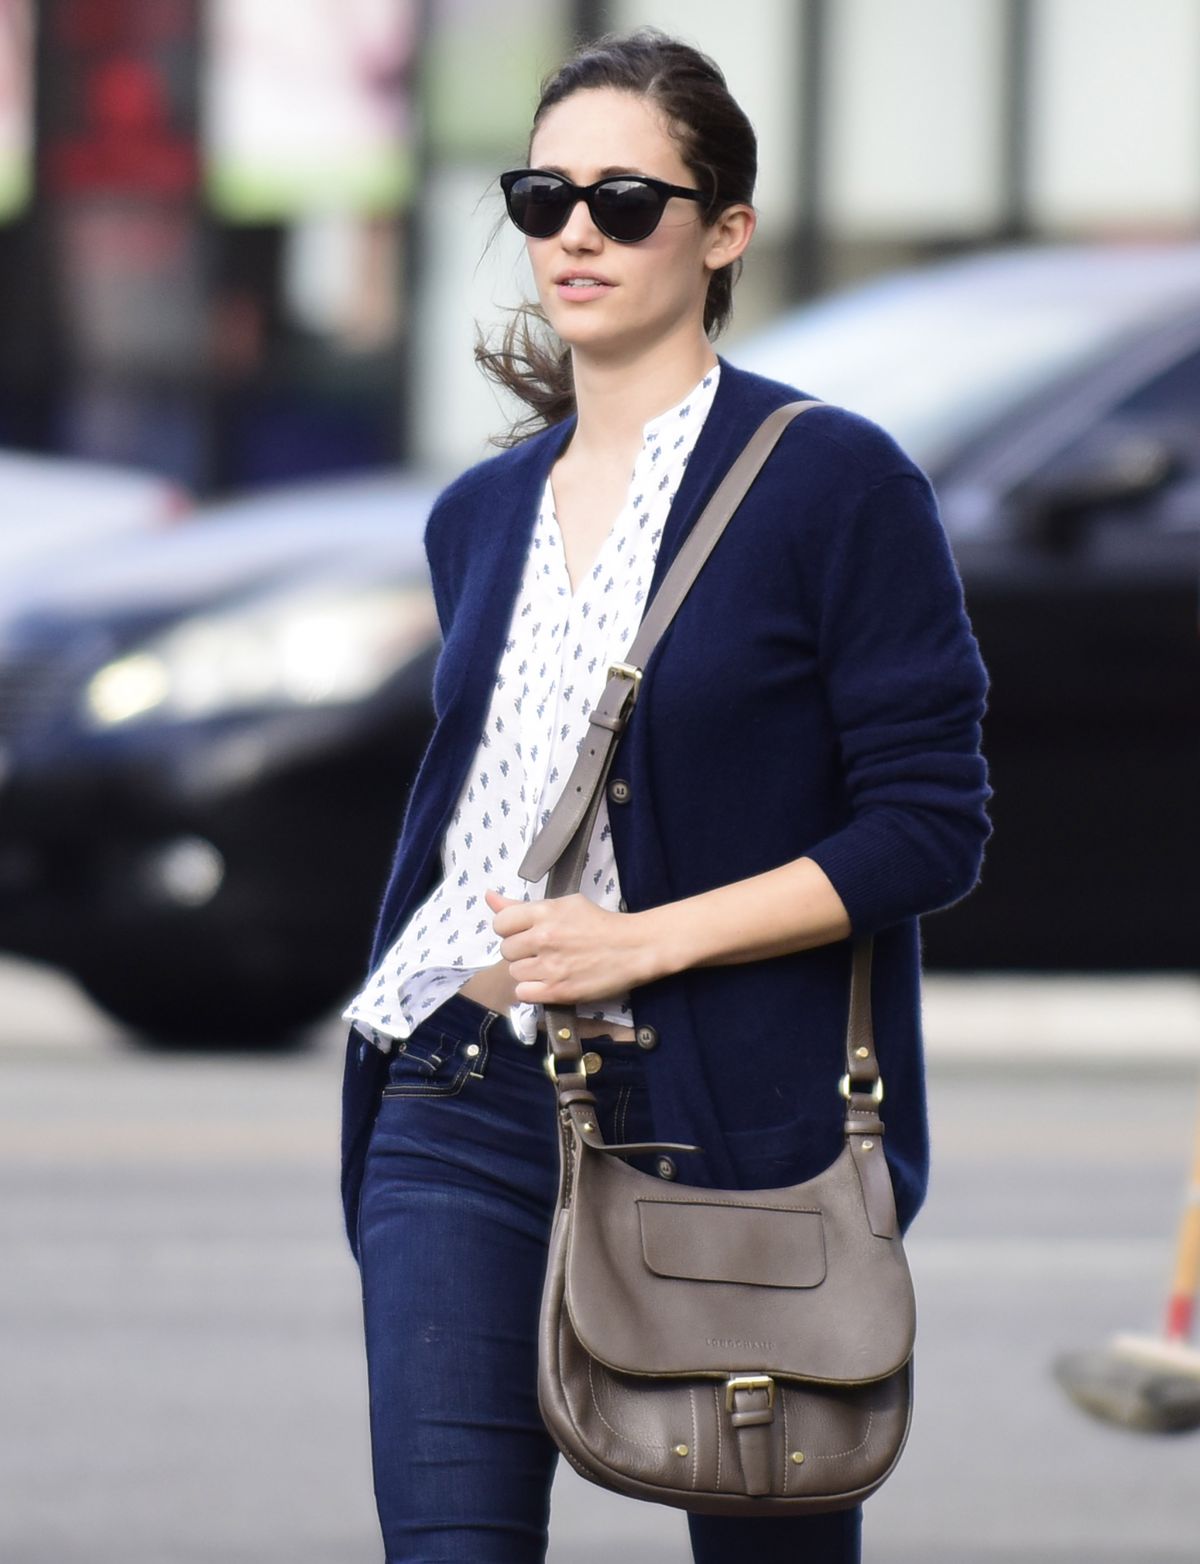 EMMY ROSSUM out and About in Los Angeles – HawtCelebs